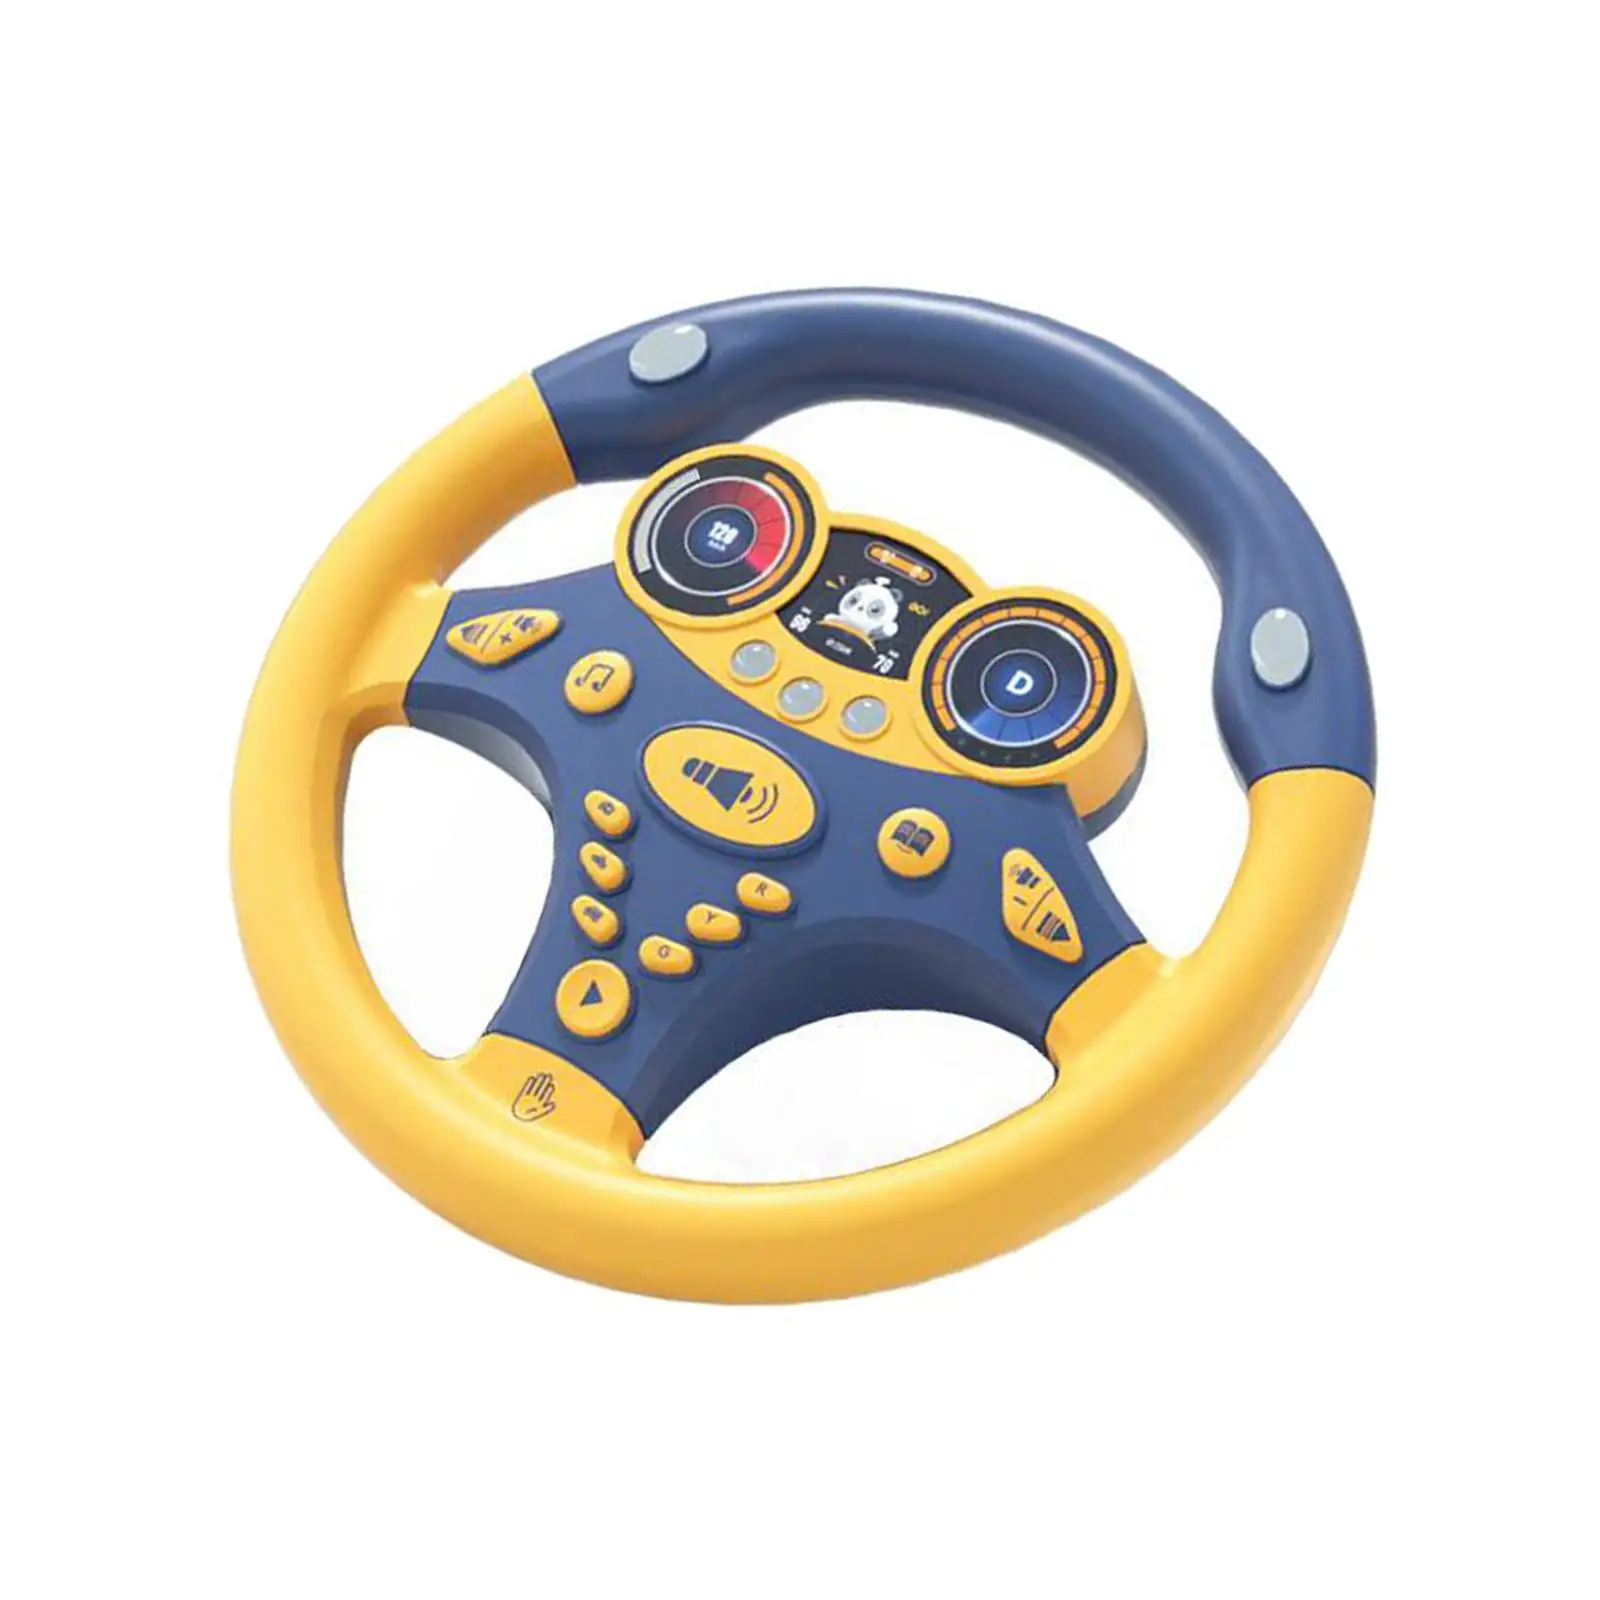 Multifunctional Electric Steering Wheel Toy Portable Pretend Driving Toy with Sound and Lights Car Driving Toy for Holiday Gifts